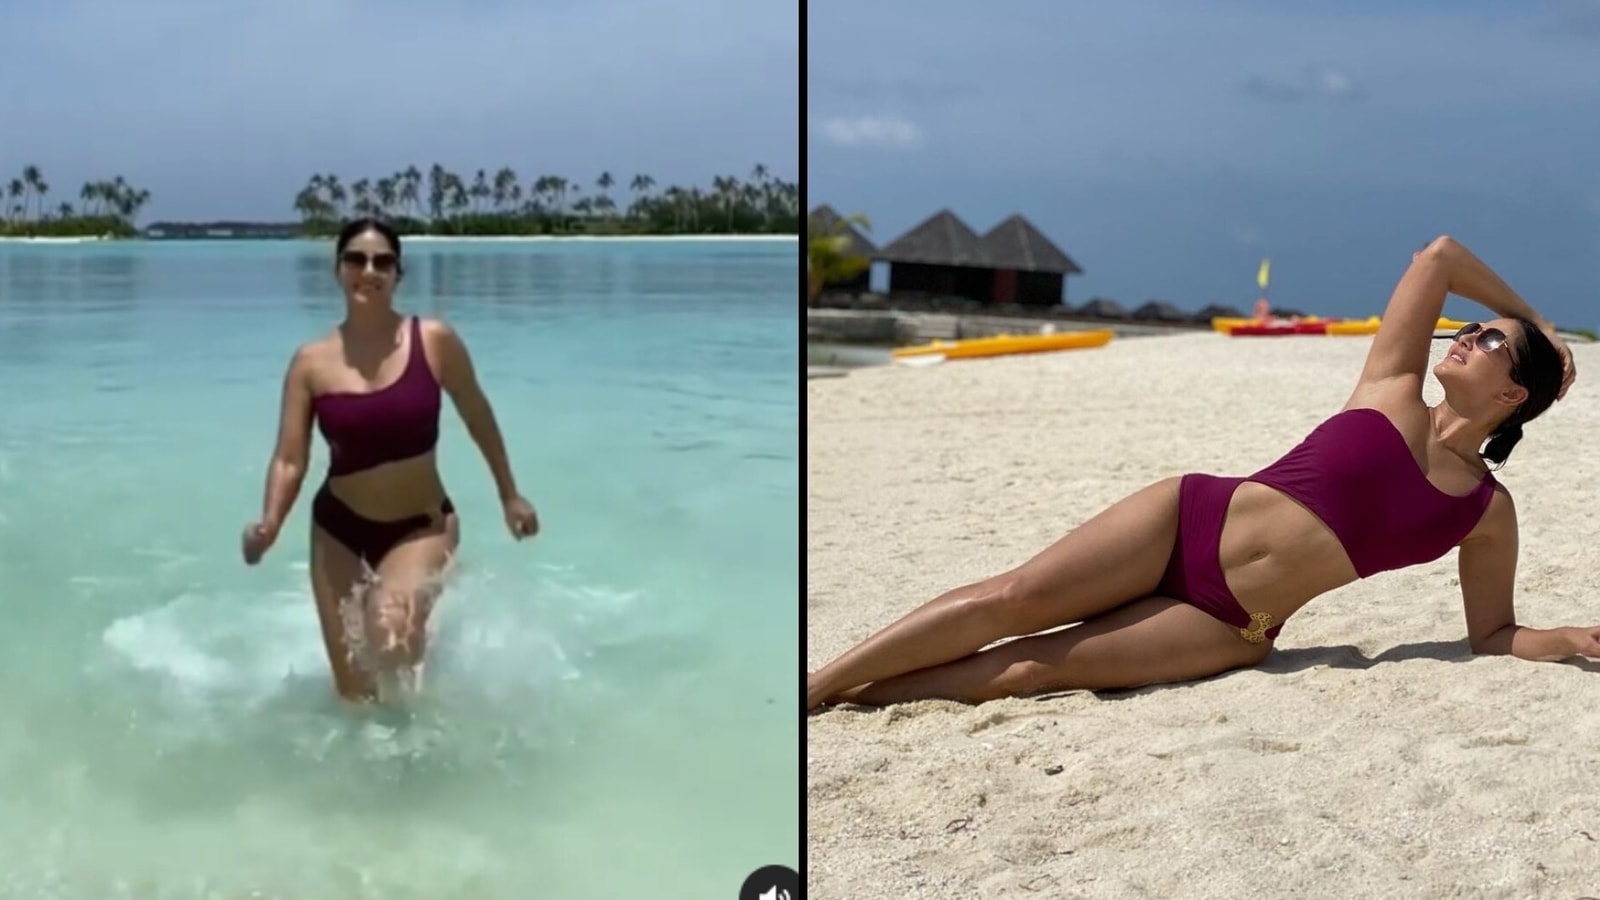 Sniliyoni Sxi Video - Sunny Leone does slo-mo run as she emerges from water, blows kiss. Watch  video from Maldives holiday | Bollywood - Hindustan Times